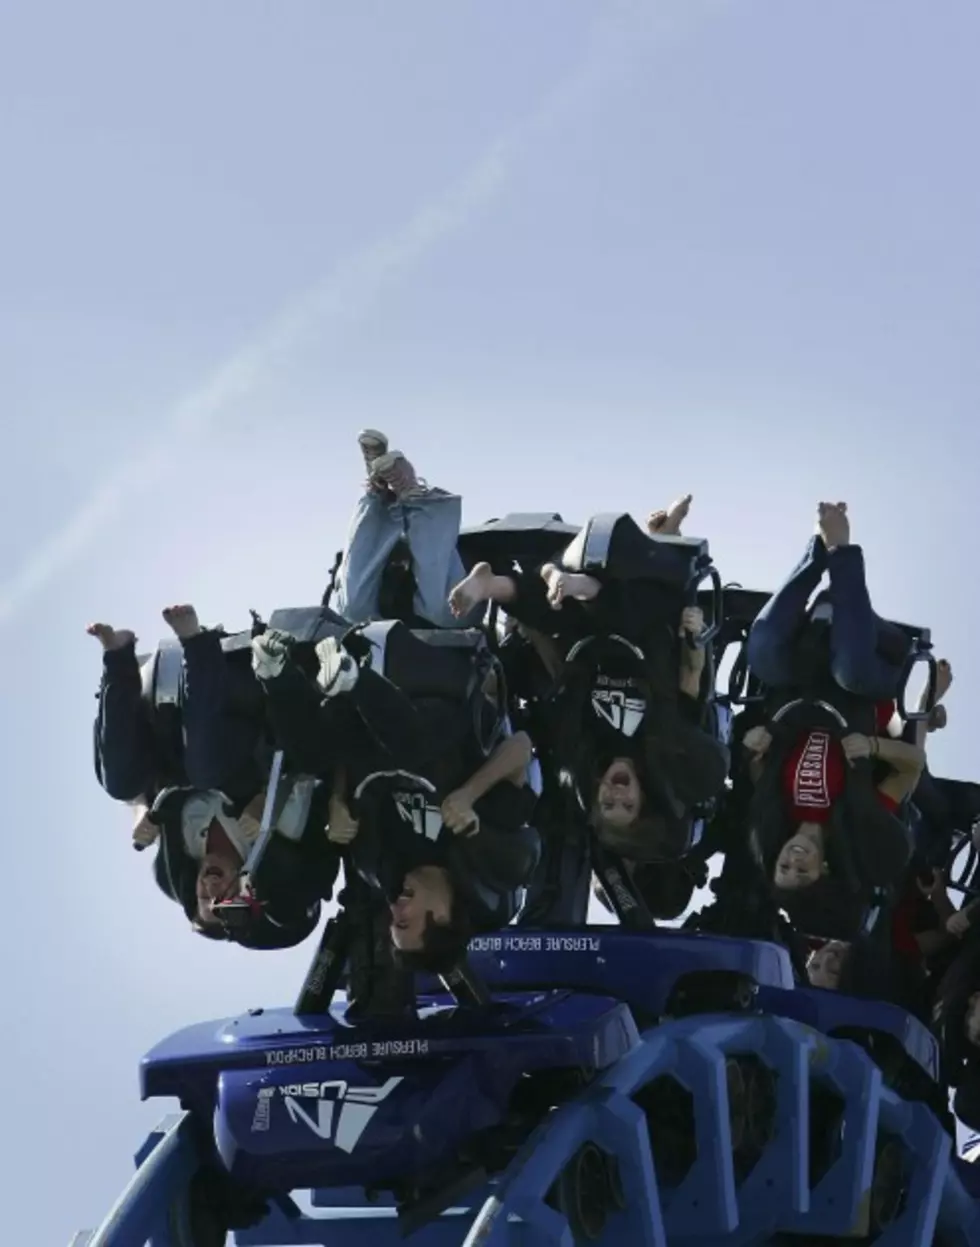 Check Out This Roller Coaster Based On The &#8216;Saw&#8217; Movie Series